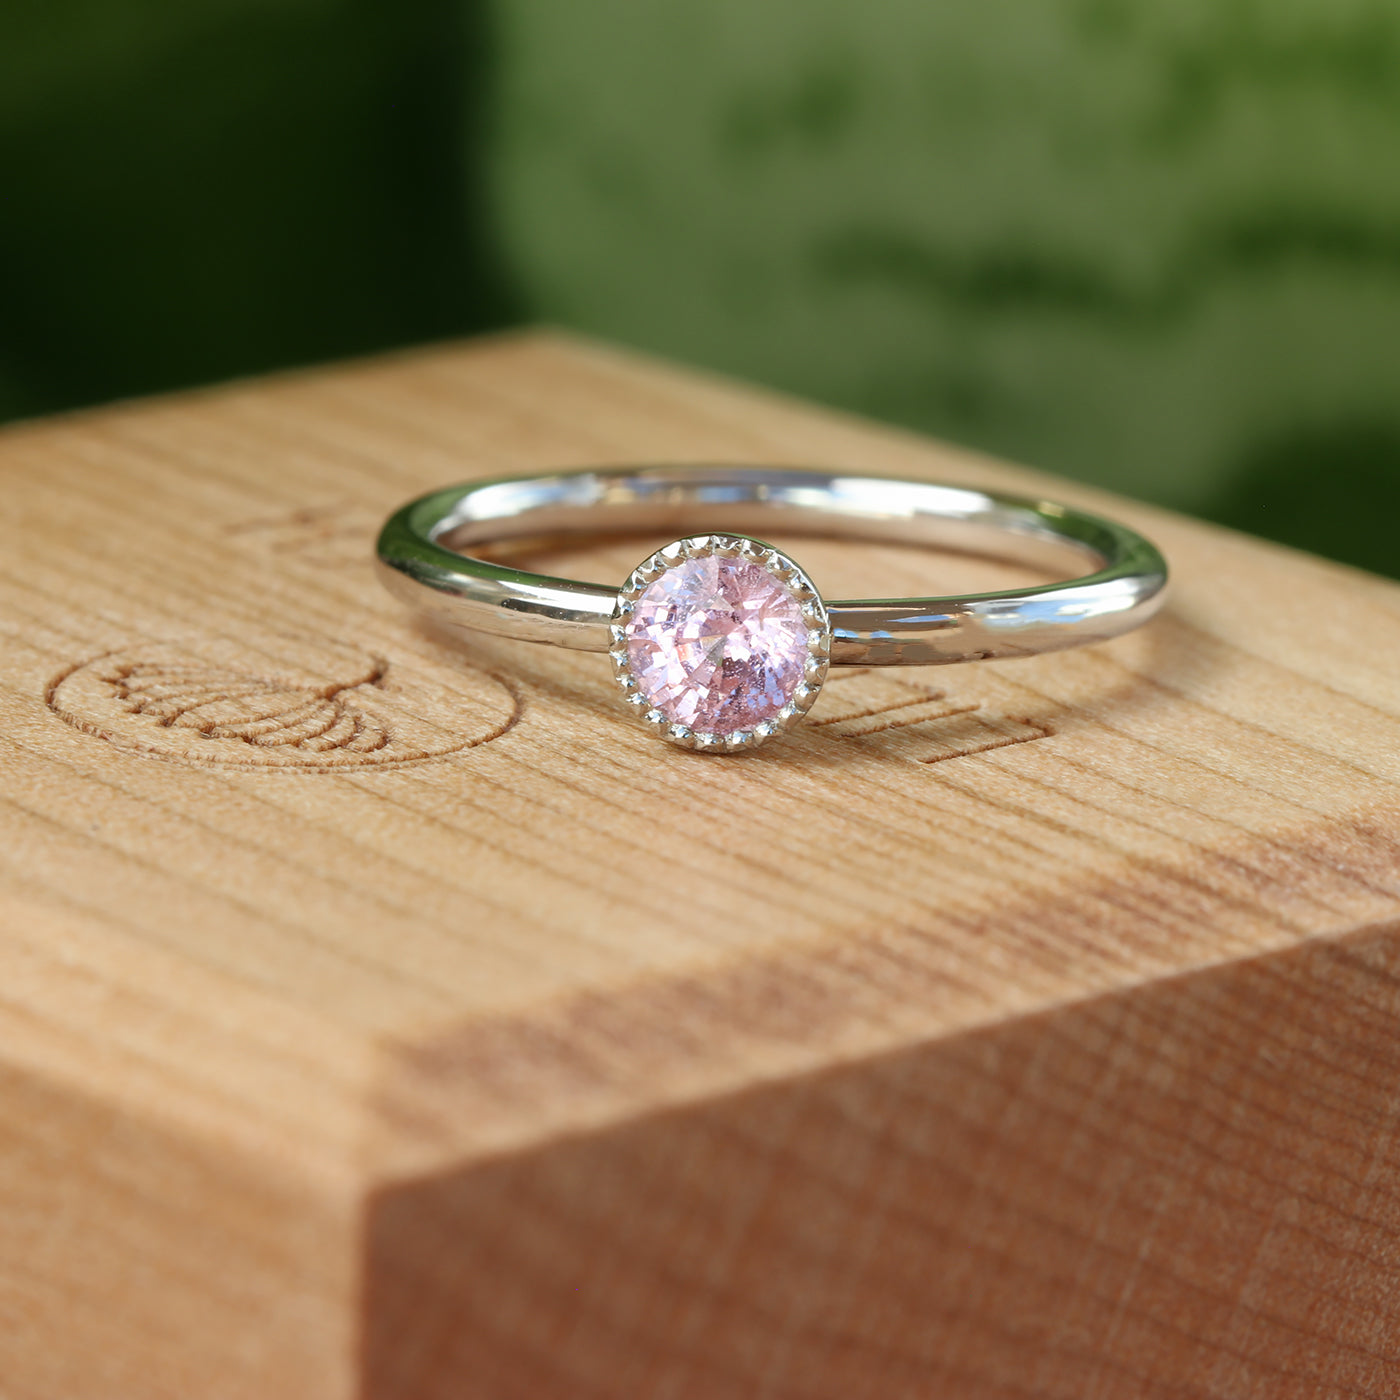 Platinum Petite Pink Sapphire Solitaire Engagement Ring (Size I 1/2, Resize G - J)